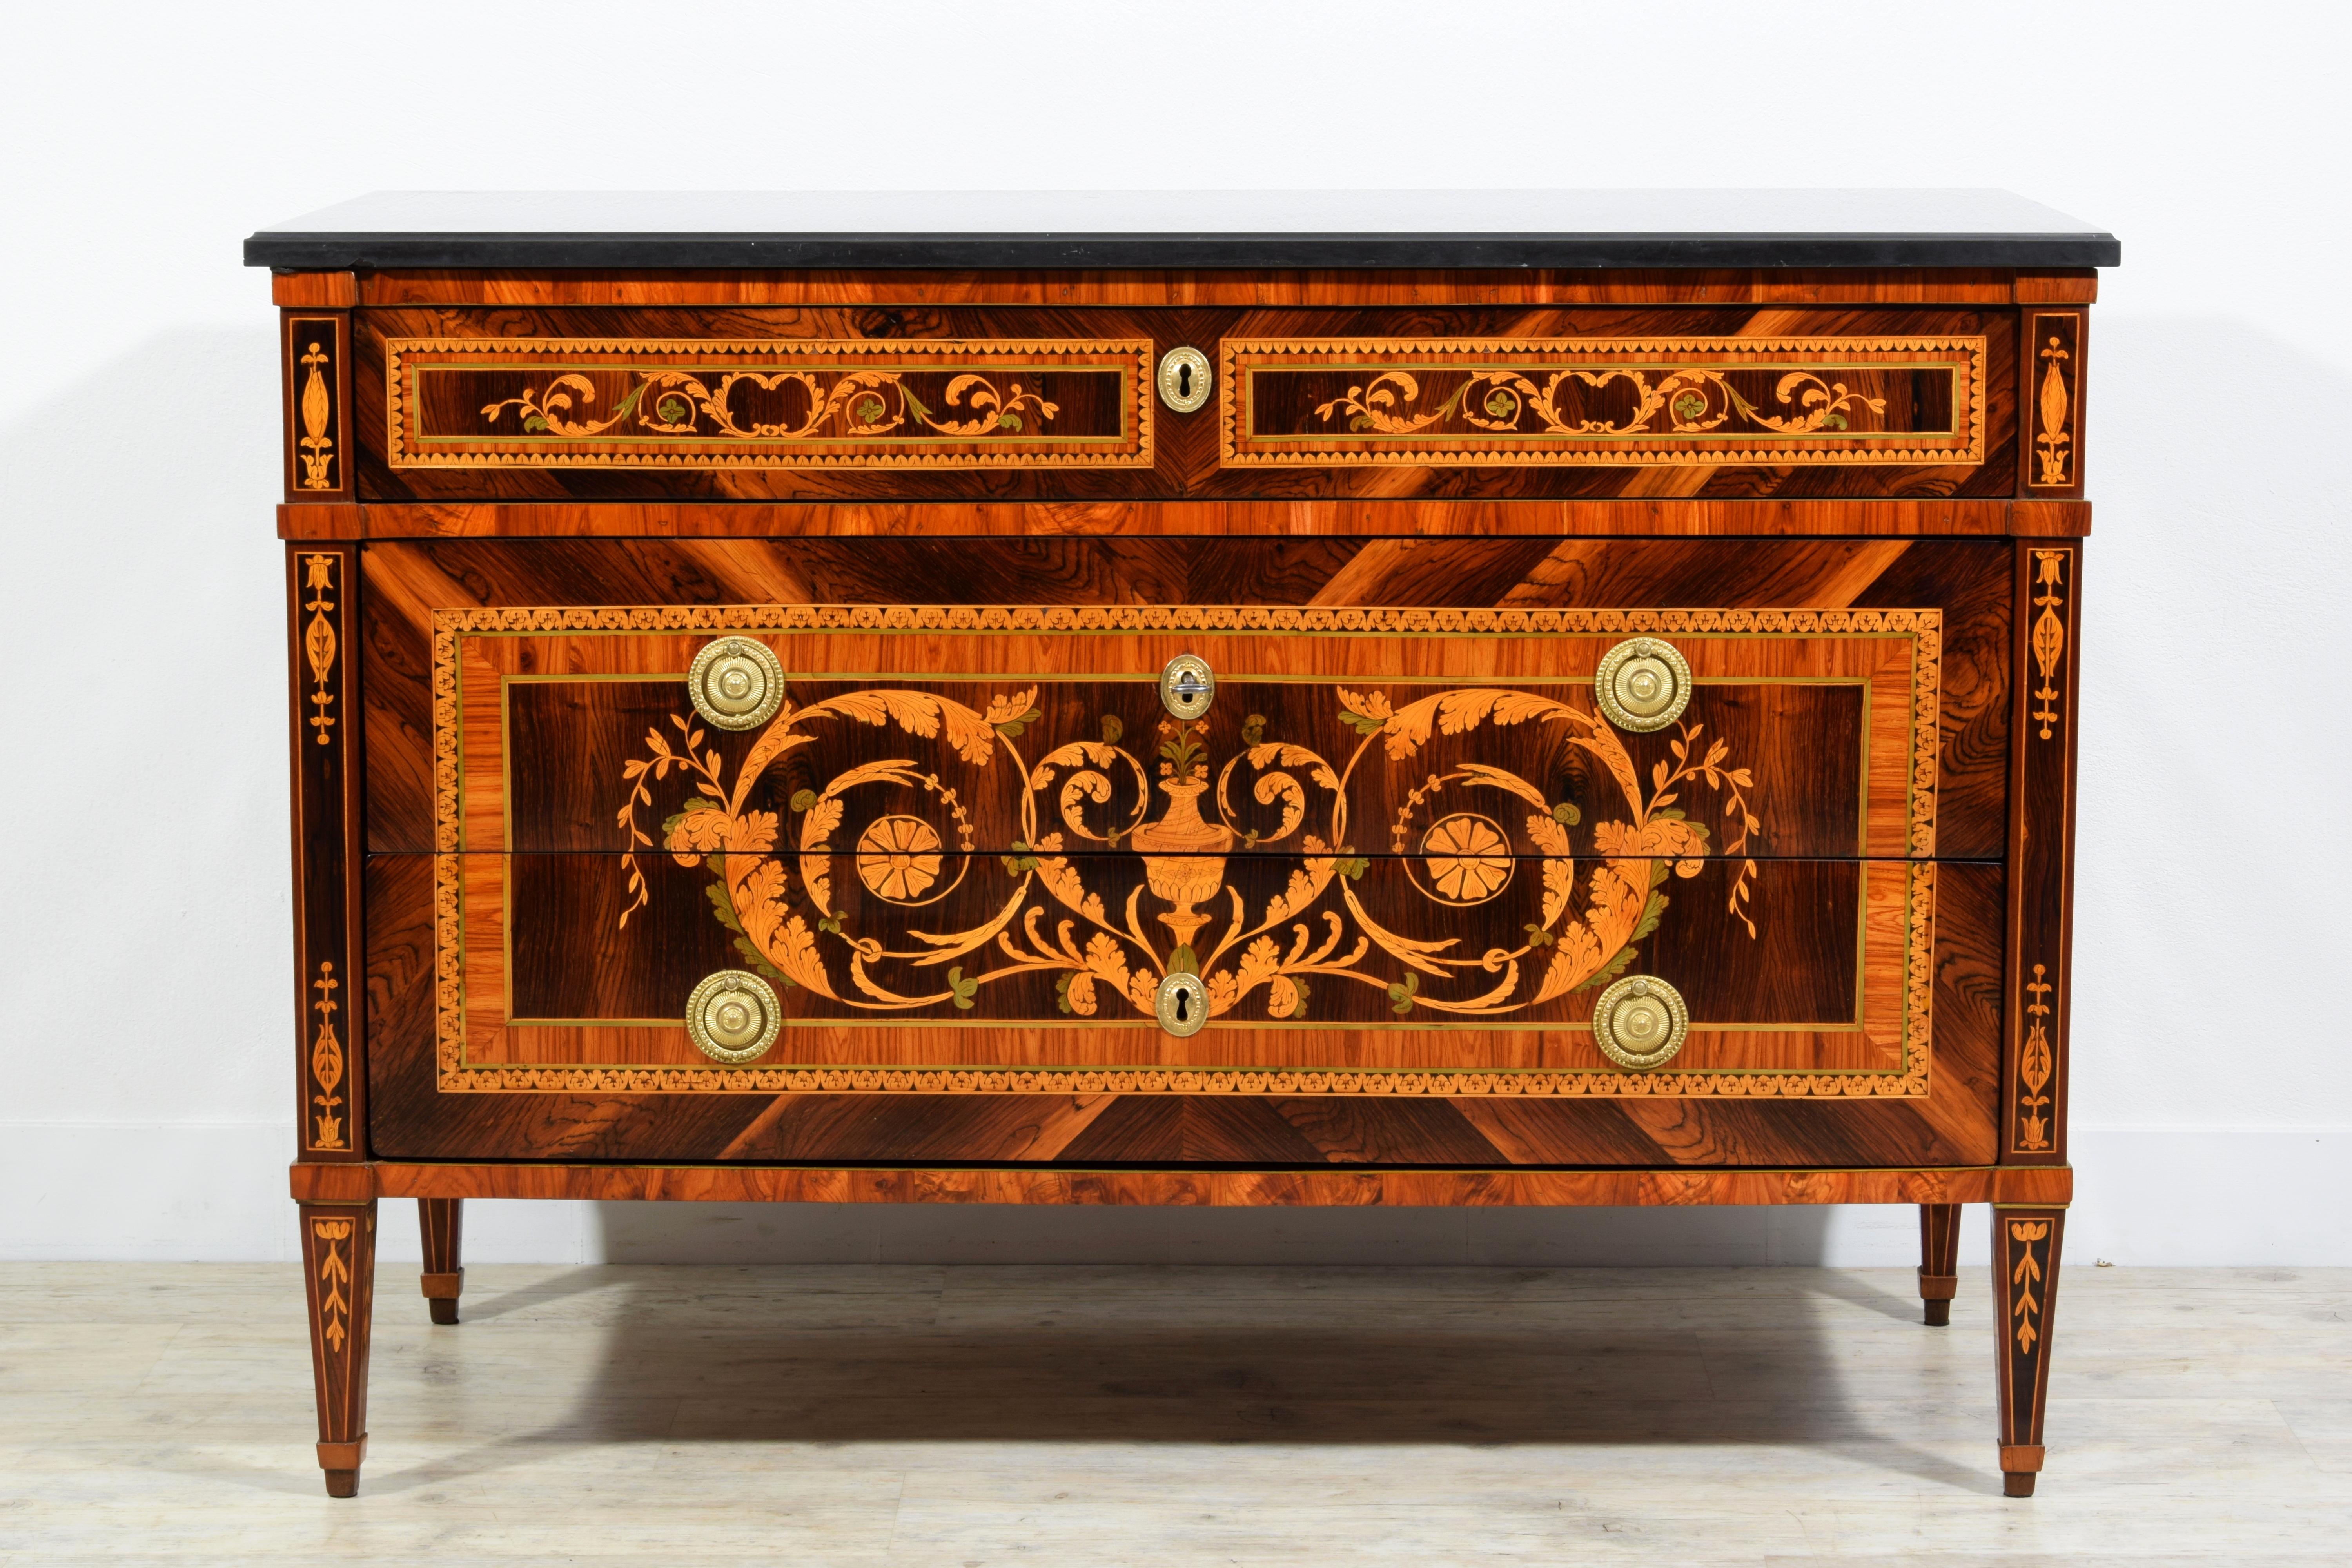 18th century, Italian Neoclassical Inlaid Chest of Drawers with Marble Top 
This refined neoclassical chest of drawers was made in Lombardy, around the end of the eighteenth century. The cabinet has two large drawers and a smaller top drawer. Of